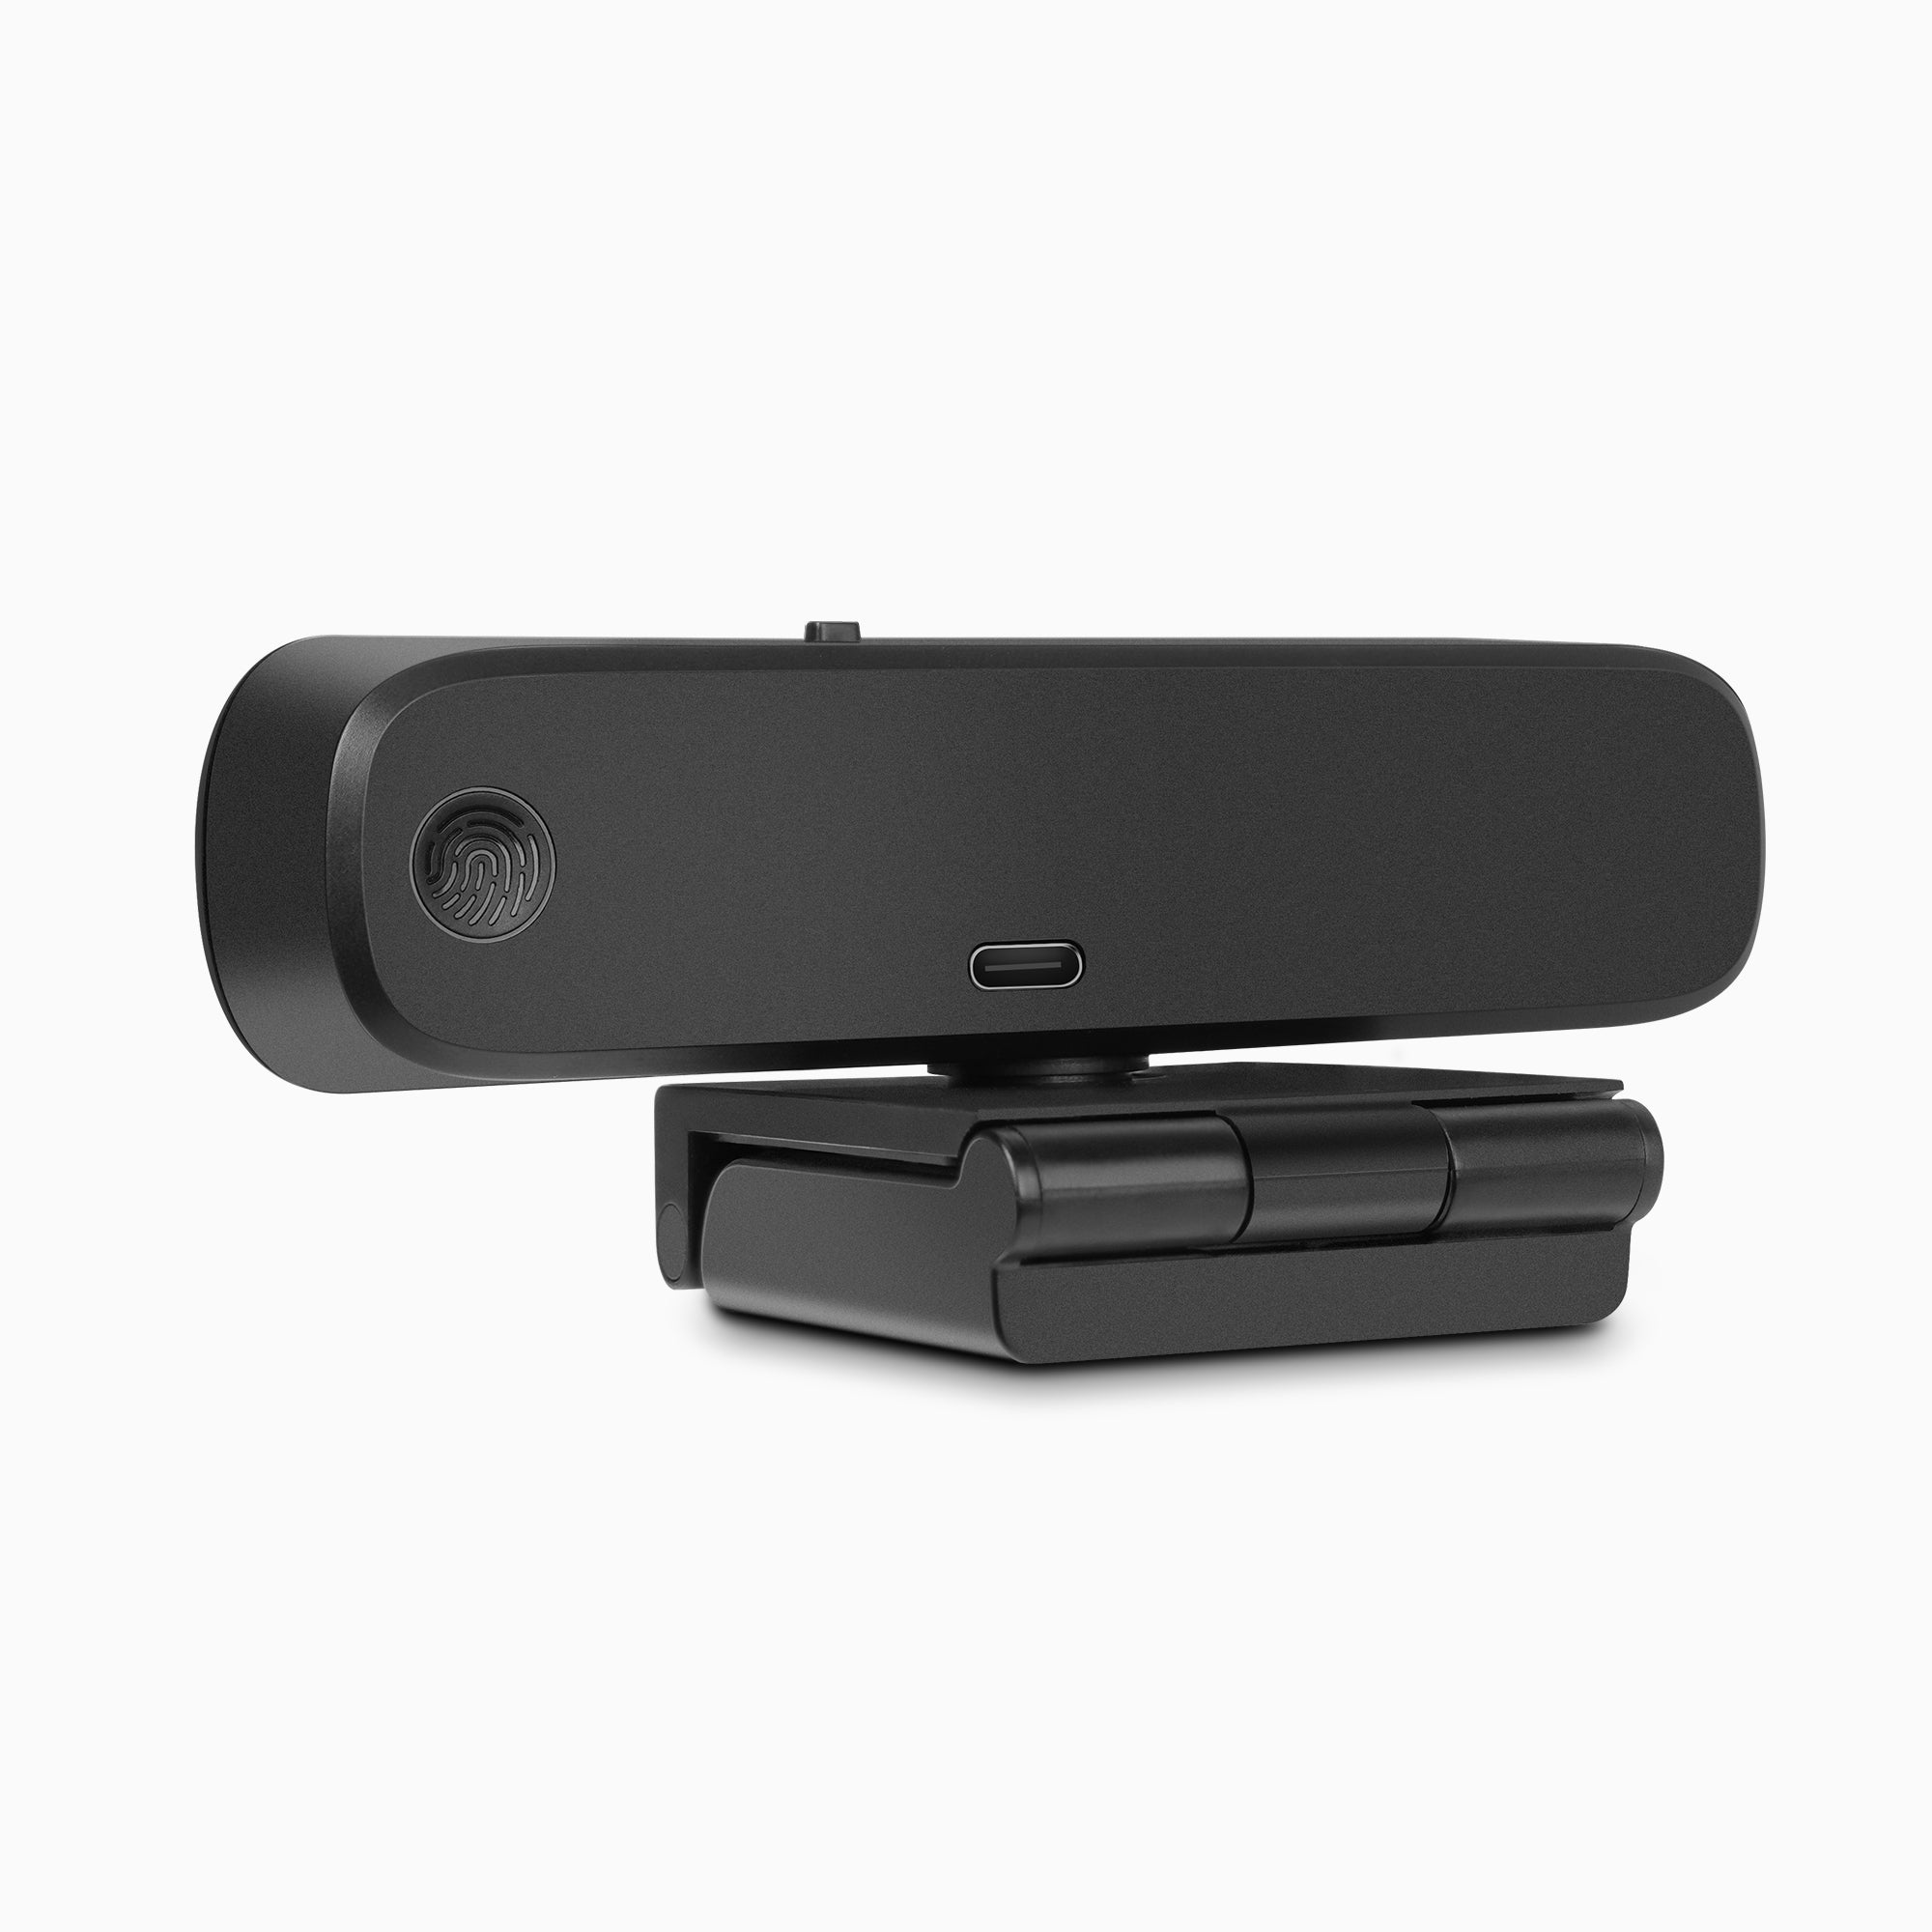 ROCWARE RC08 All-in-one 1080p Webcam with Speaker and Mic